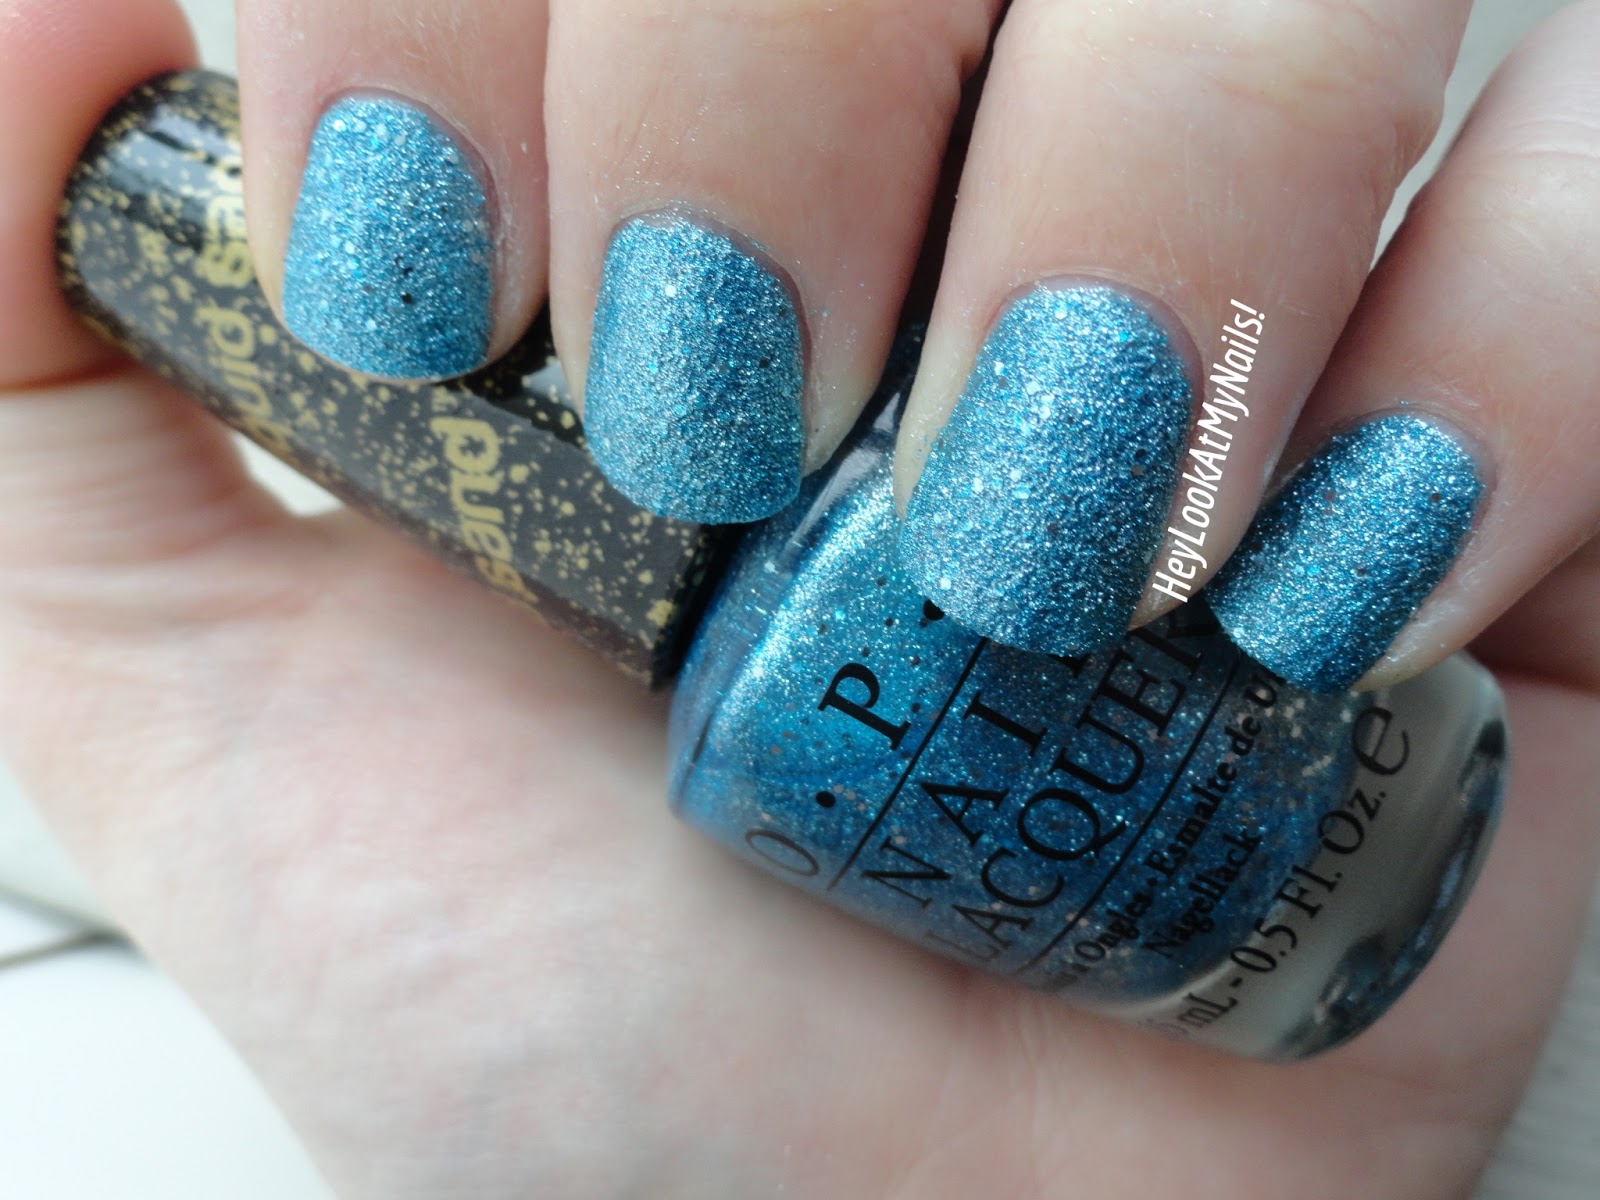 Hey, Look At My Nails!: OPI Bond Girl Liquid Sand Swatches!